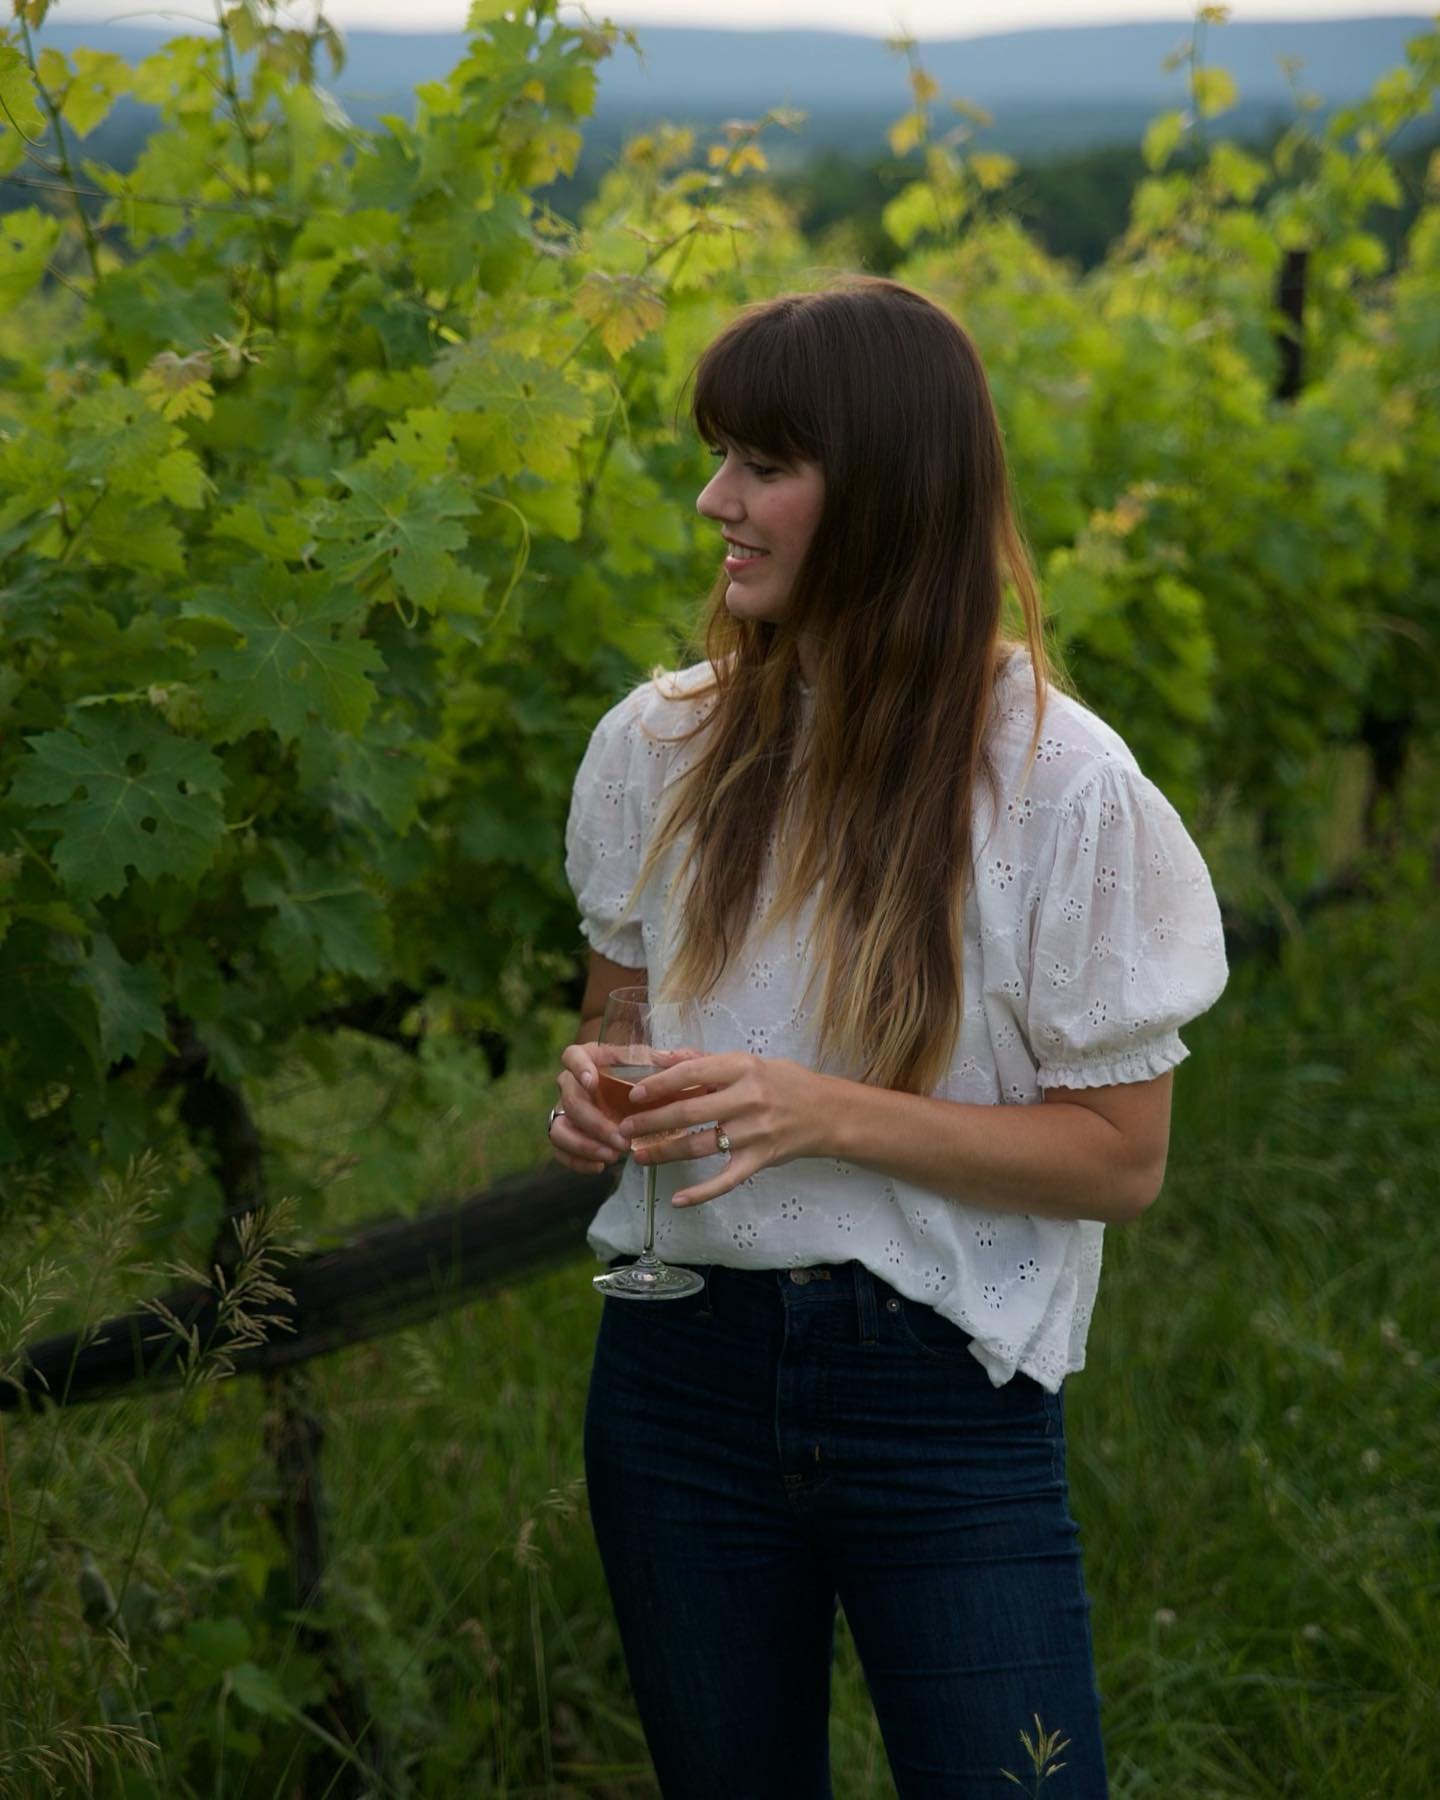 Our dear friend and Winebow Representative, Sarah Walsh, will be here this Saturday with Italian Wine Specialist Lauren Wiersma to lead you through a delicious Italian-focused tasting! Each flight will feature three different wines from four of Italy